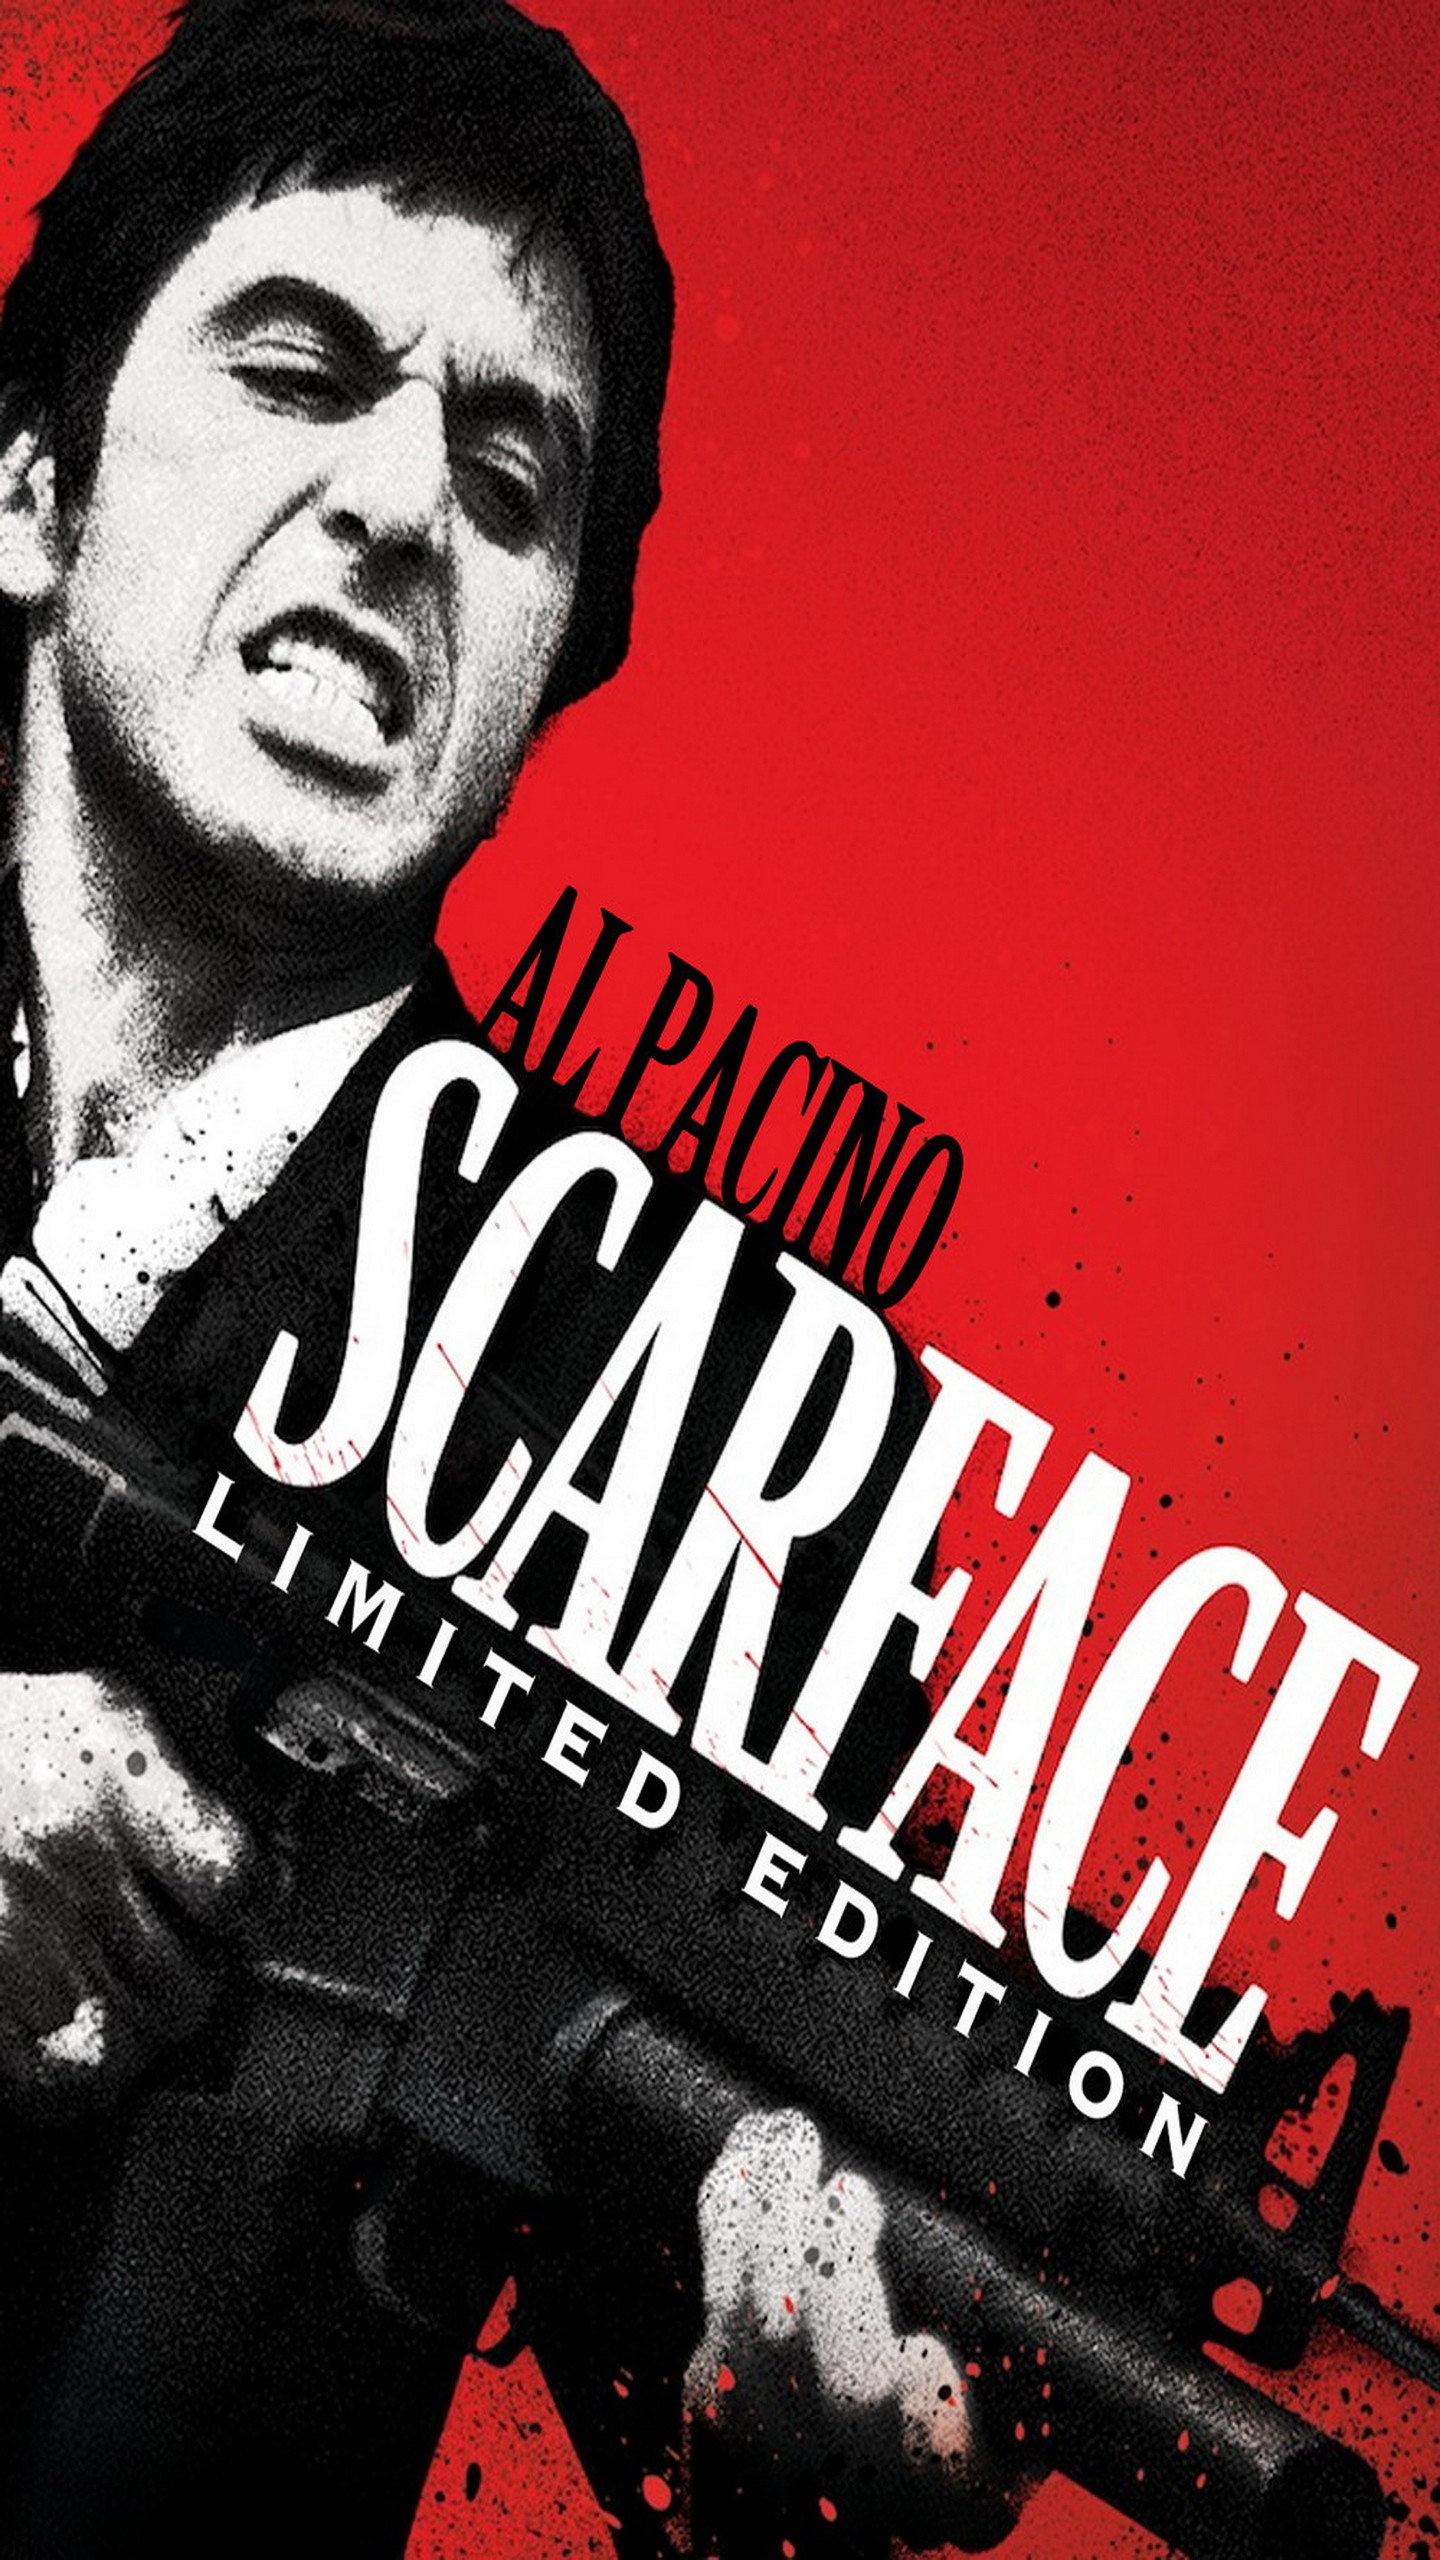 Scarface Galaxy Note Edge Wallpaper 4 Galaxy Note Edge iPhone 6 Plus